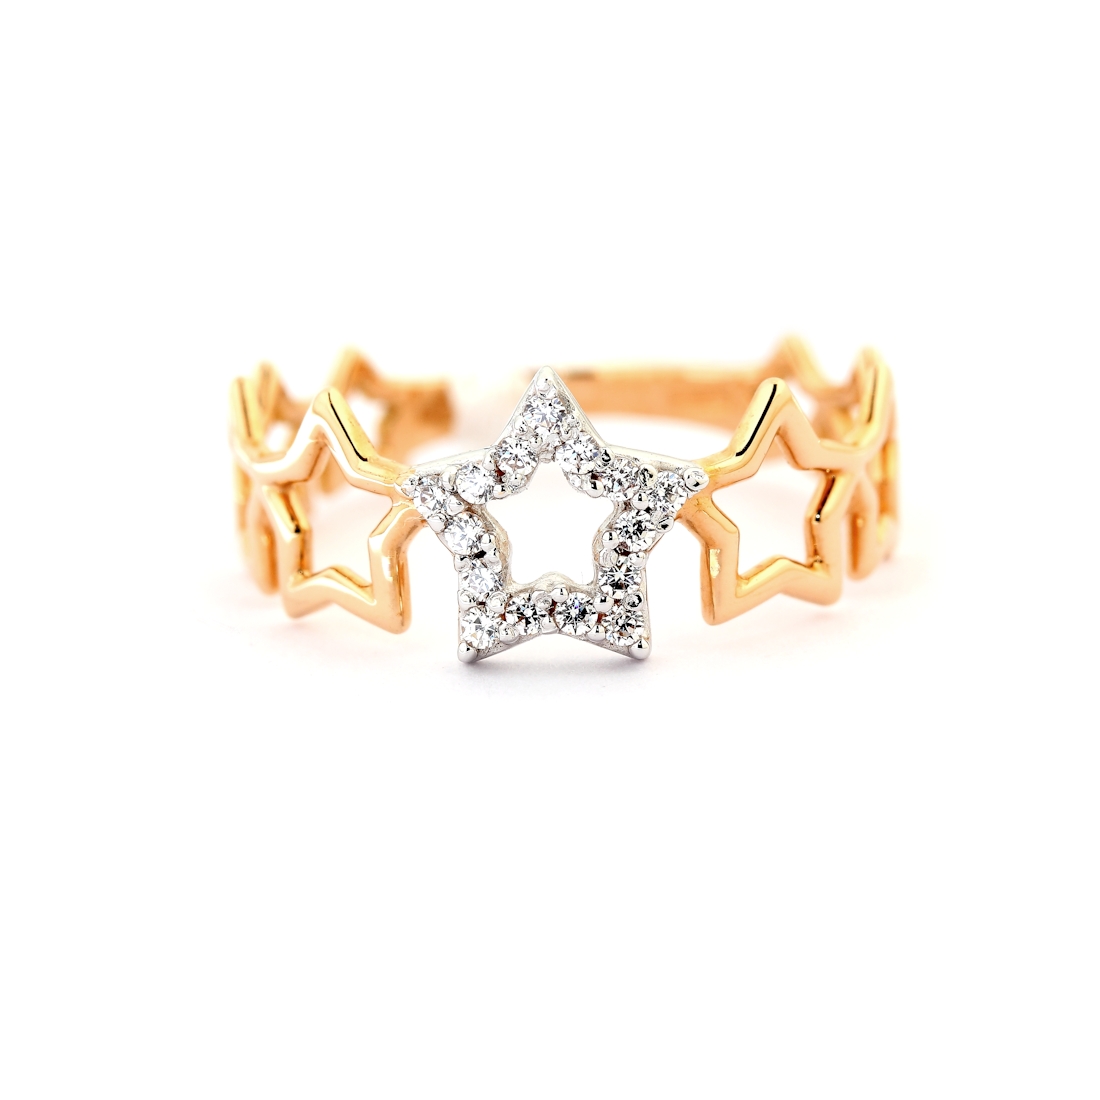 750 Mill. Rose Gold Ring with Cubic Zirconia Size N-3/4